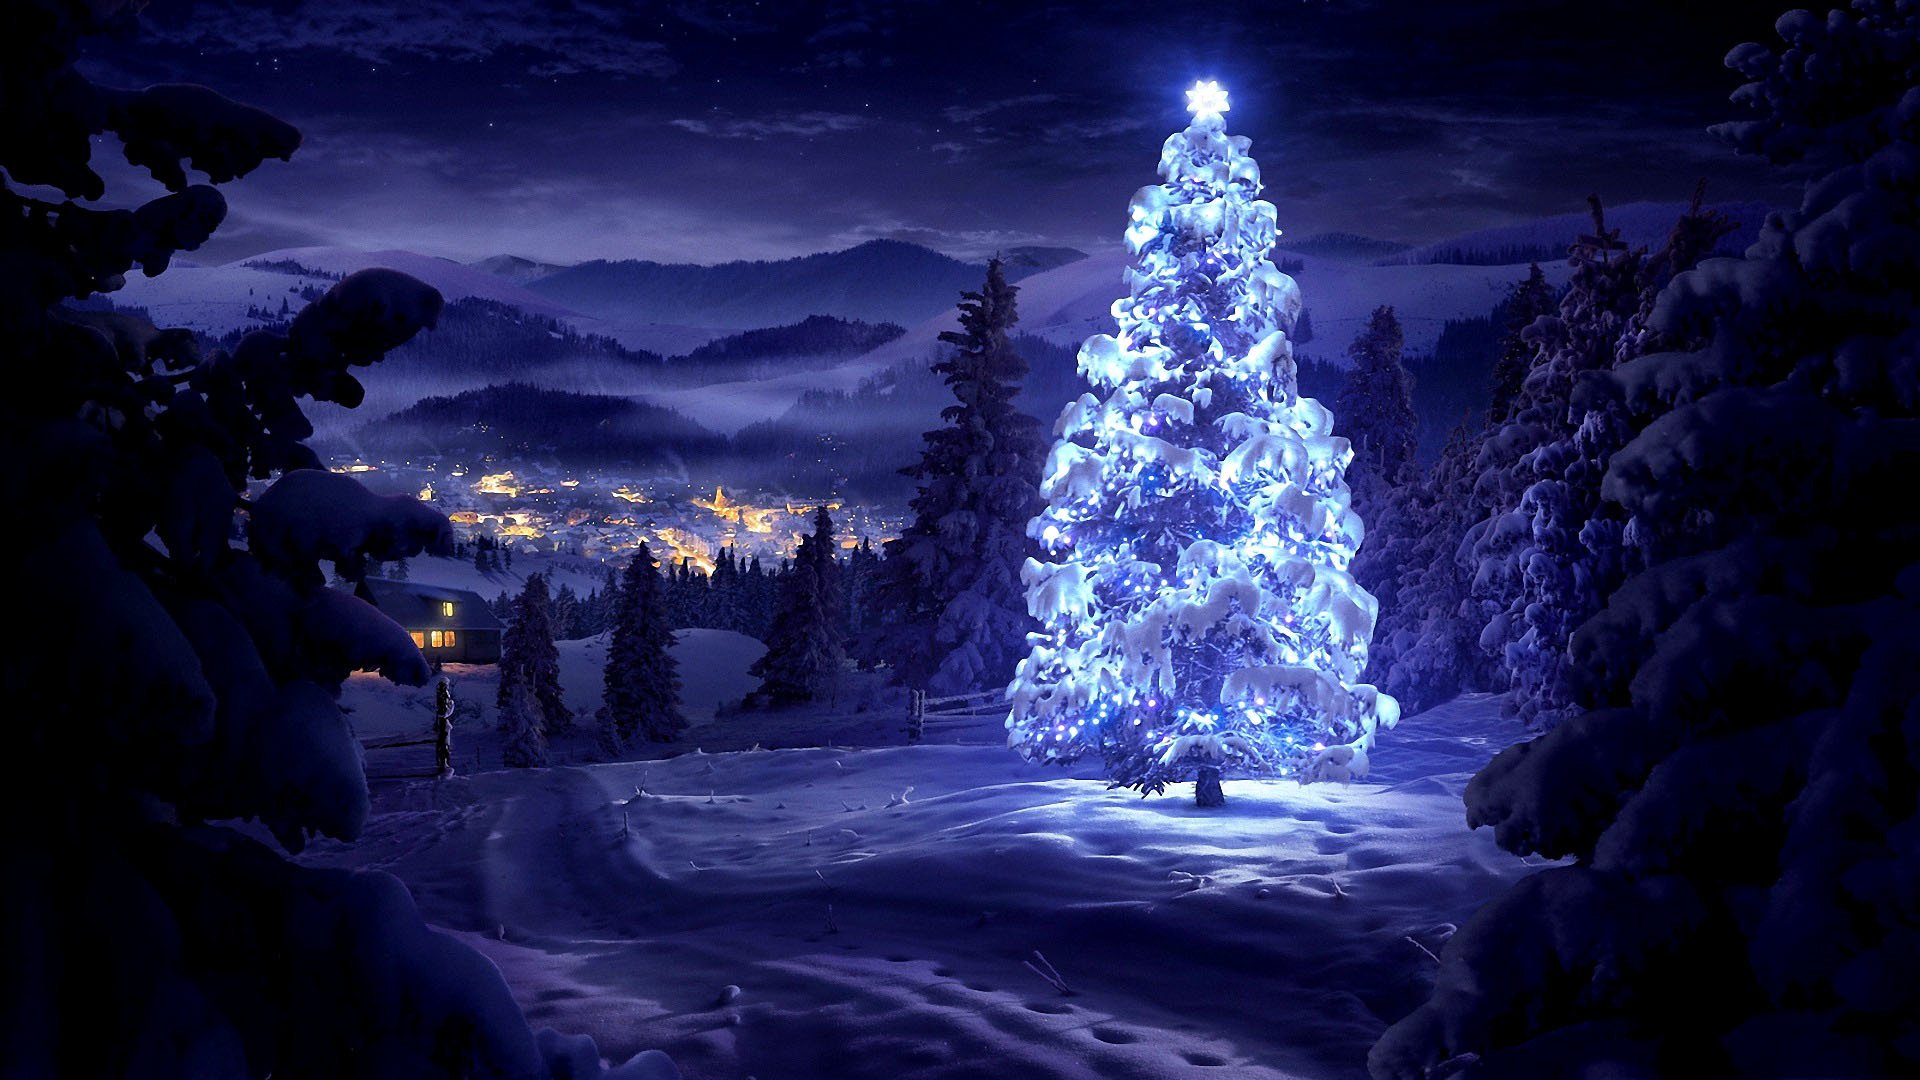 Aesthetic Christmas Wallpaper HD Free download